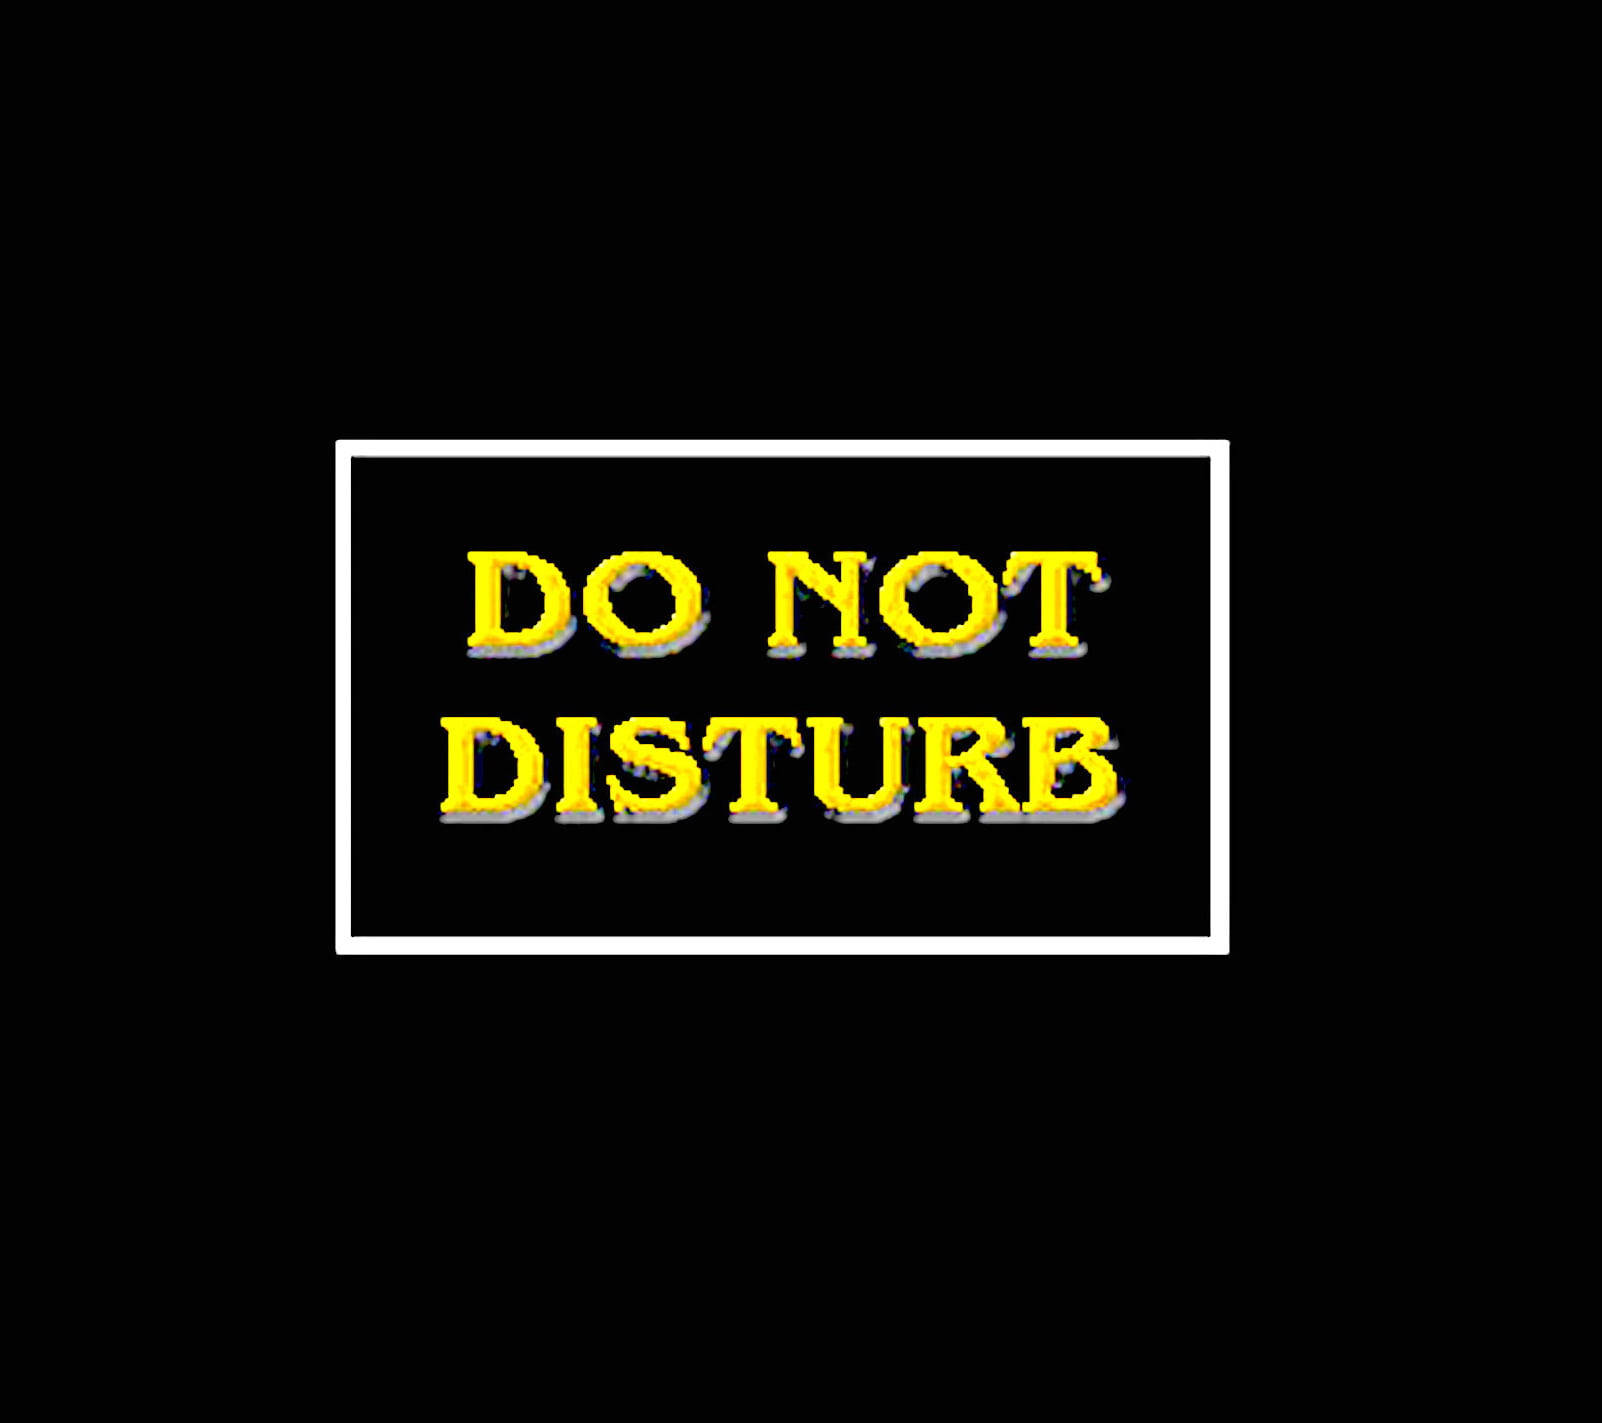 DO NOT DISTURB WALLPAPER  TRENDING POSTER Paper Print  Quotes   Motivation posters in India  Buy art film design movie music nature  and educational paintingswallpapers at Flipkartcom